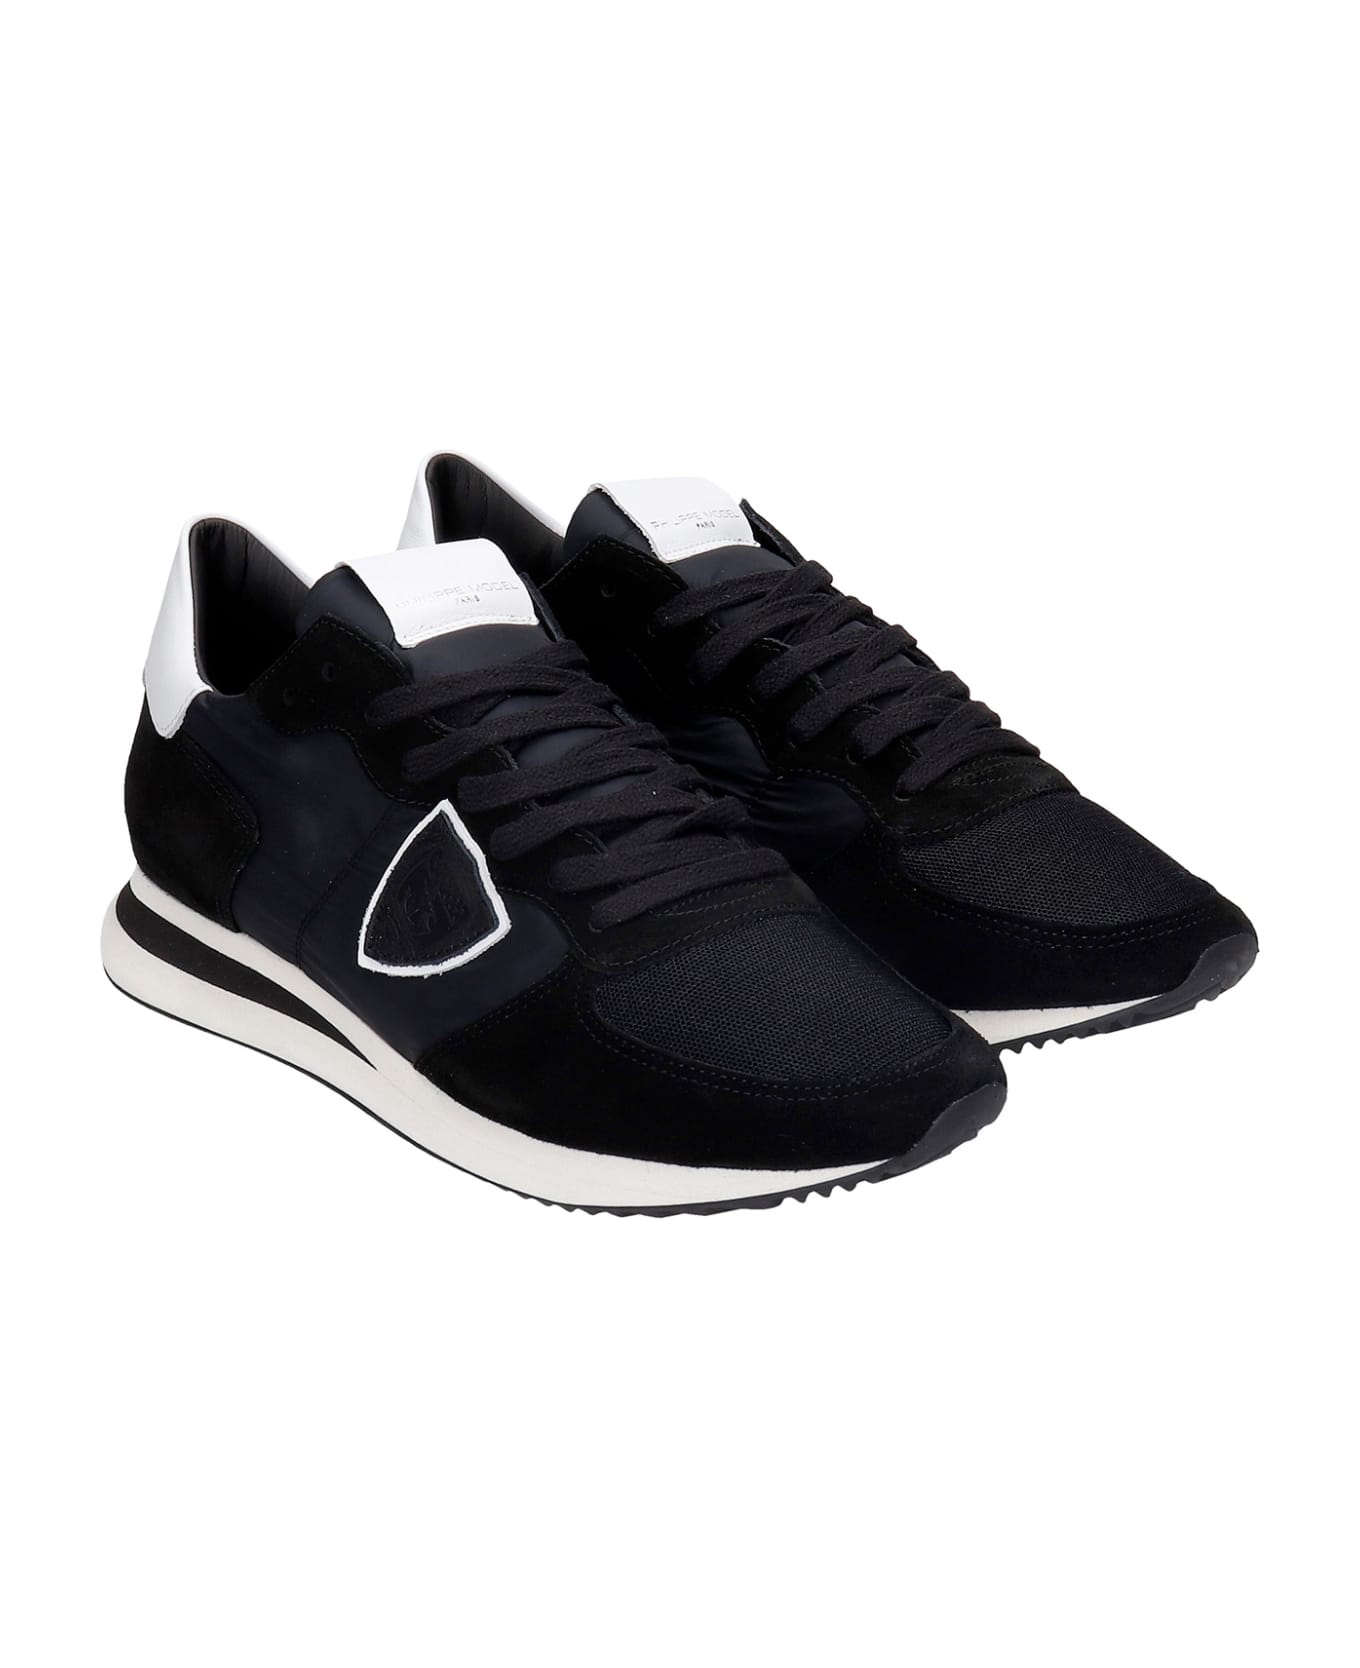 Philippe Model Trpx Sneakers In Black Suede And Fabric - BLACK